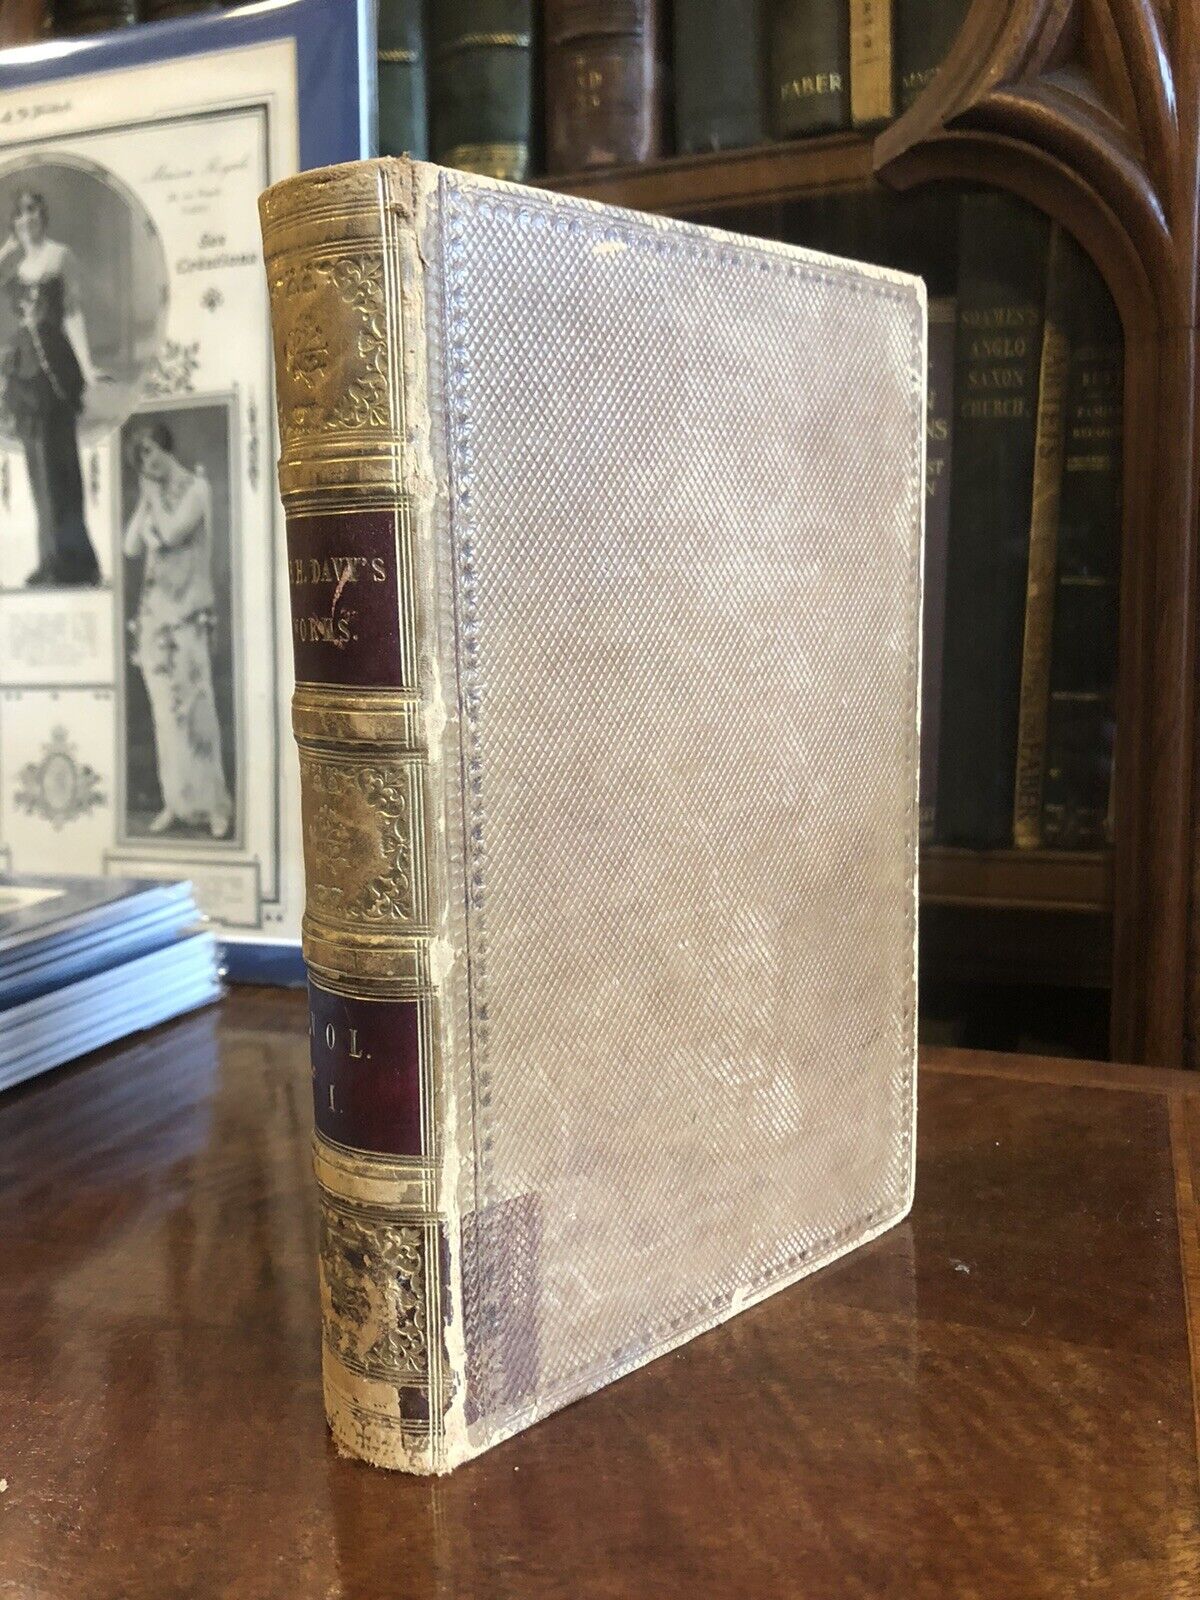 1839 Memoirs of the Life of Sir Humphry Davy (Davy Safety Lamp Inventor) Science